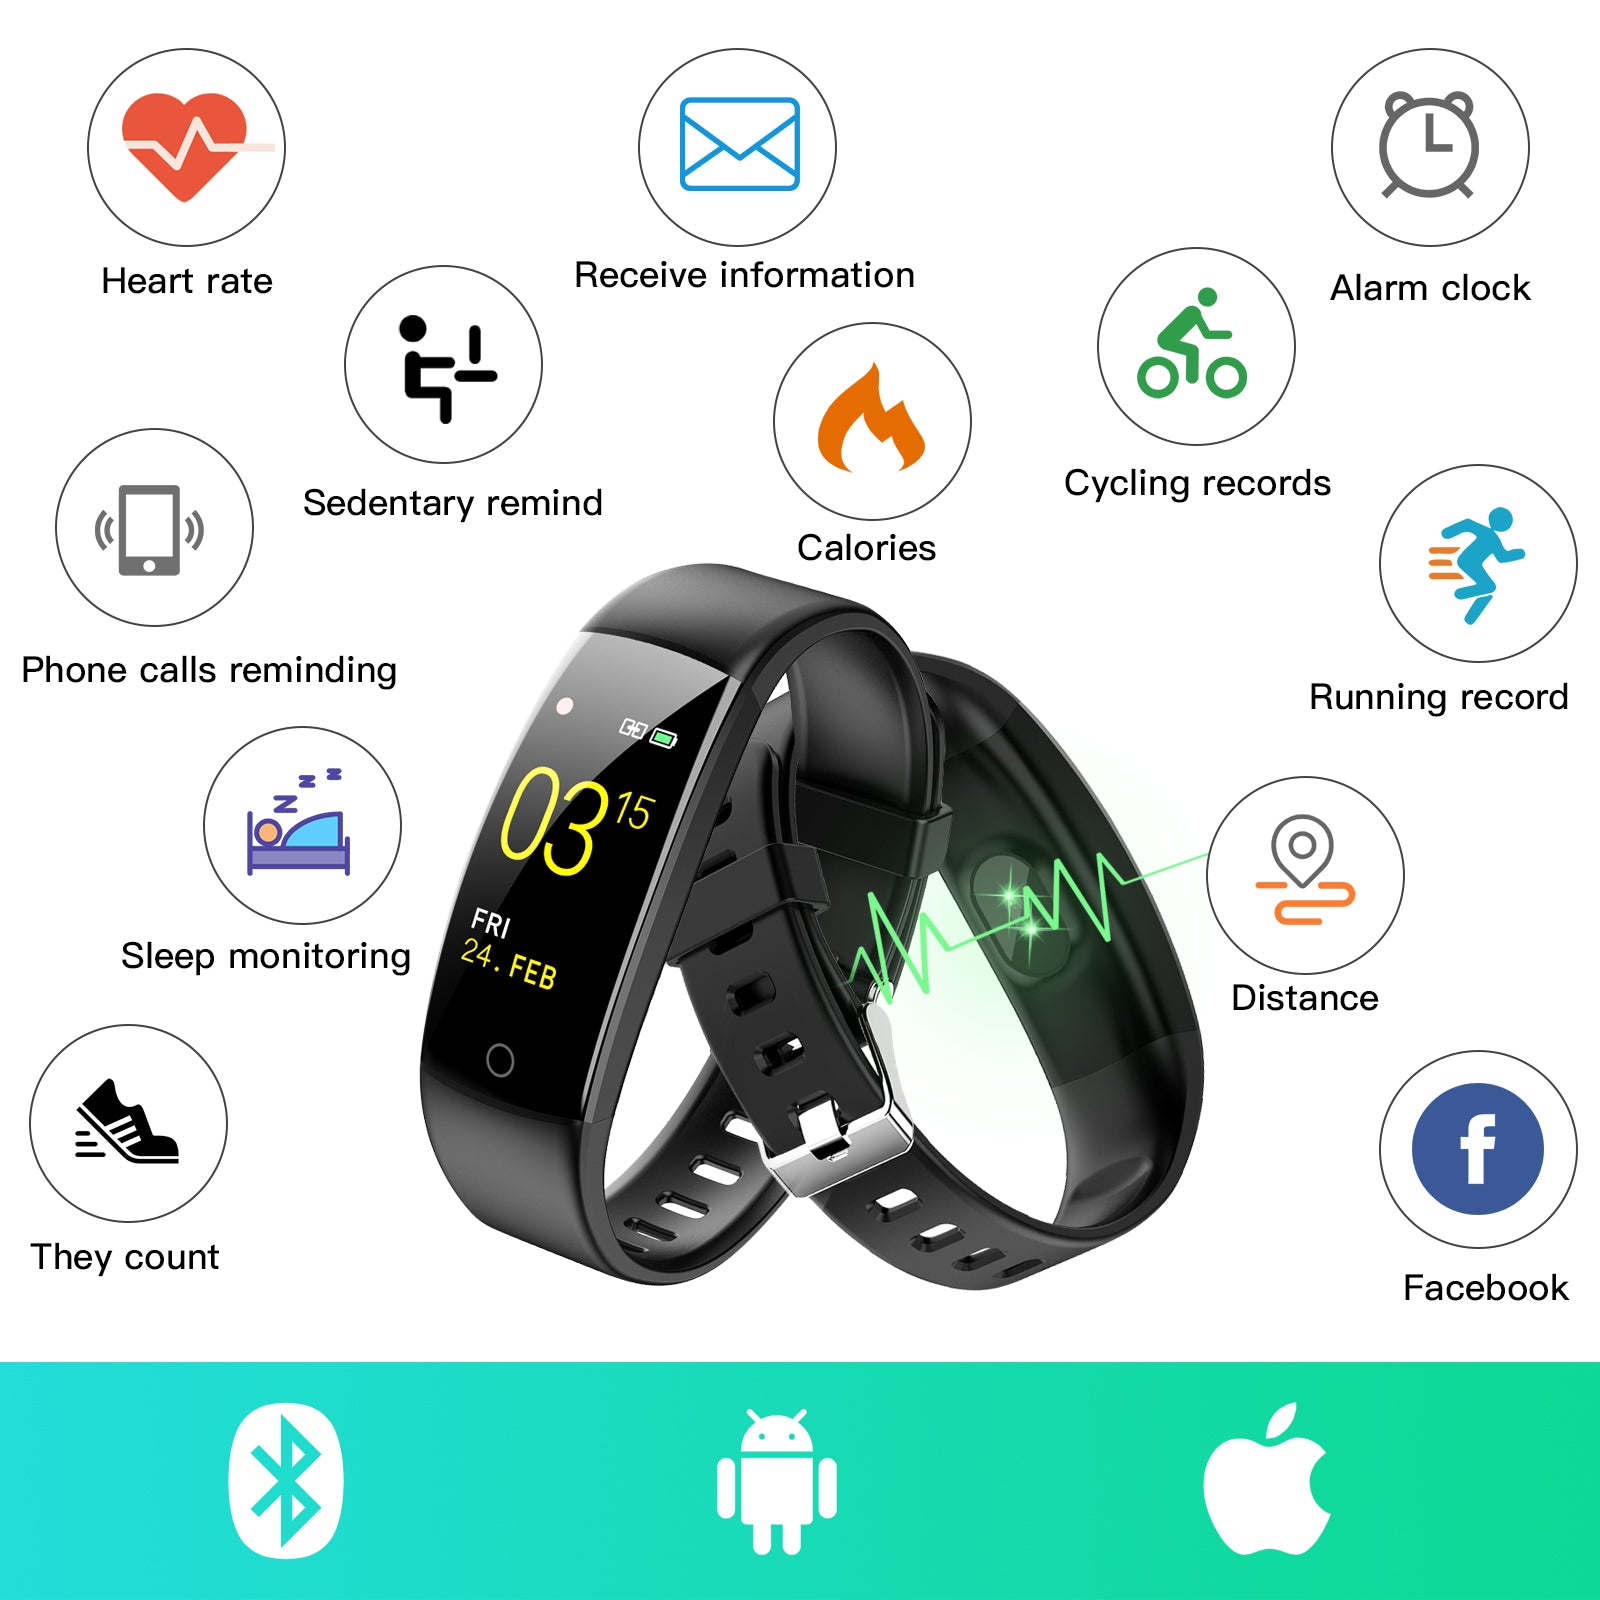 Fitness Tracker, Heart Rate Monitor (Waterproof Fitness with Step Counter, Calorie Counter, Pedometer)